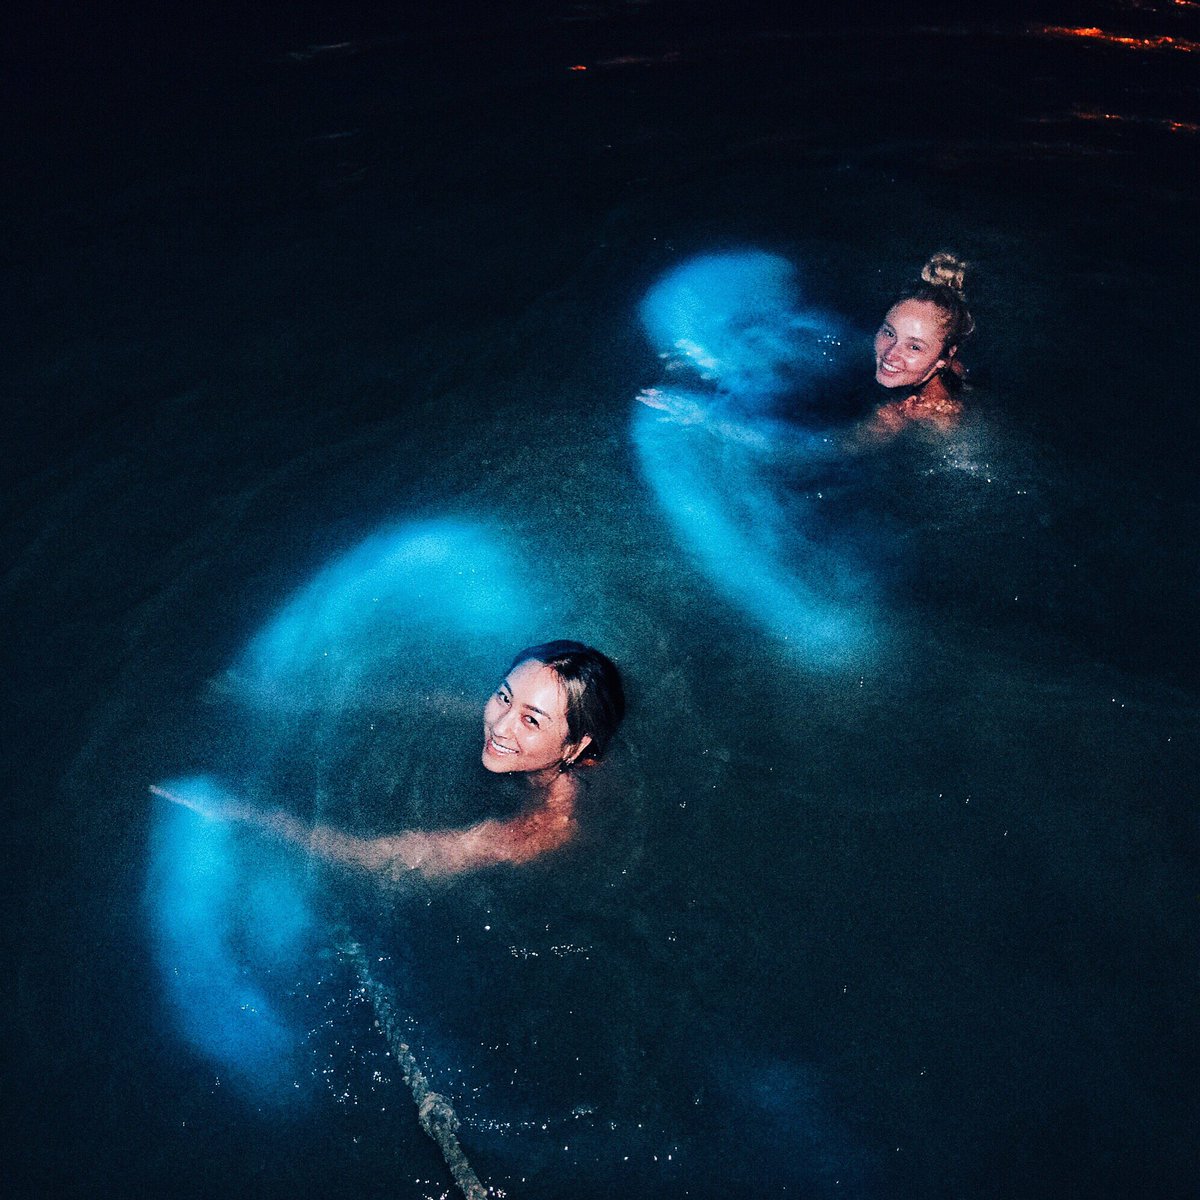 Late night swim in bioluminescence with the girls ???????????????? https://t.co/CVX8UbfIrH